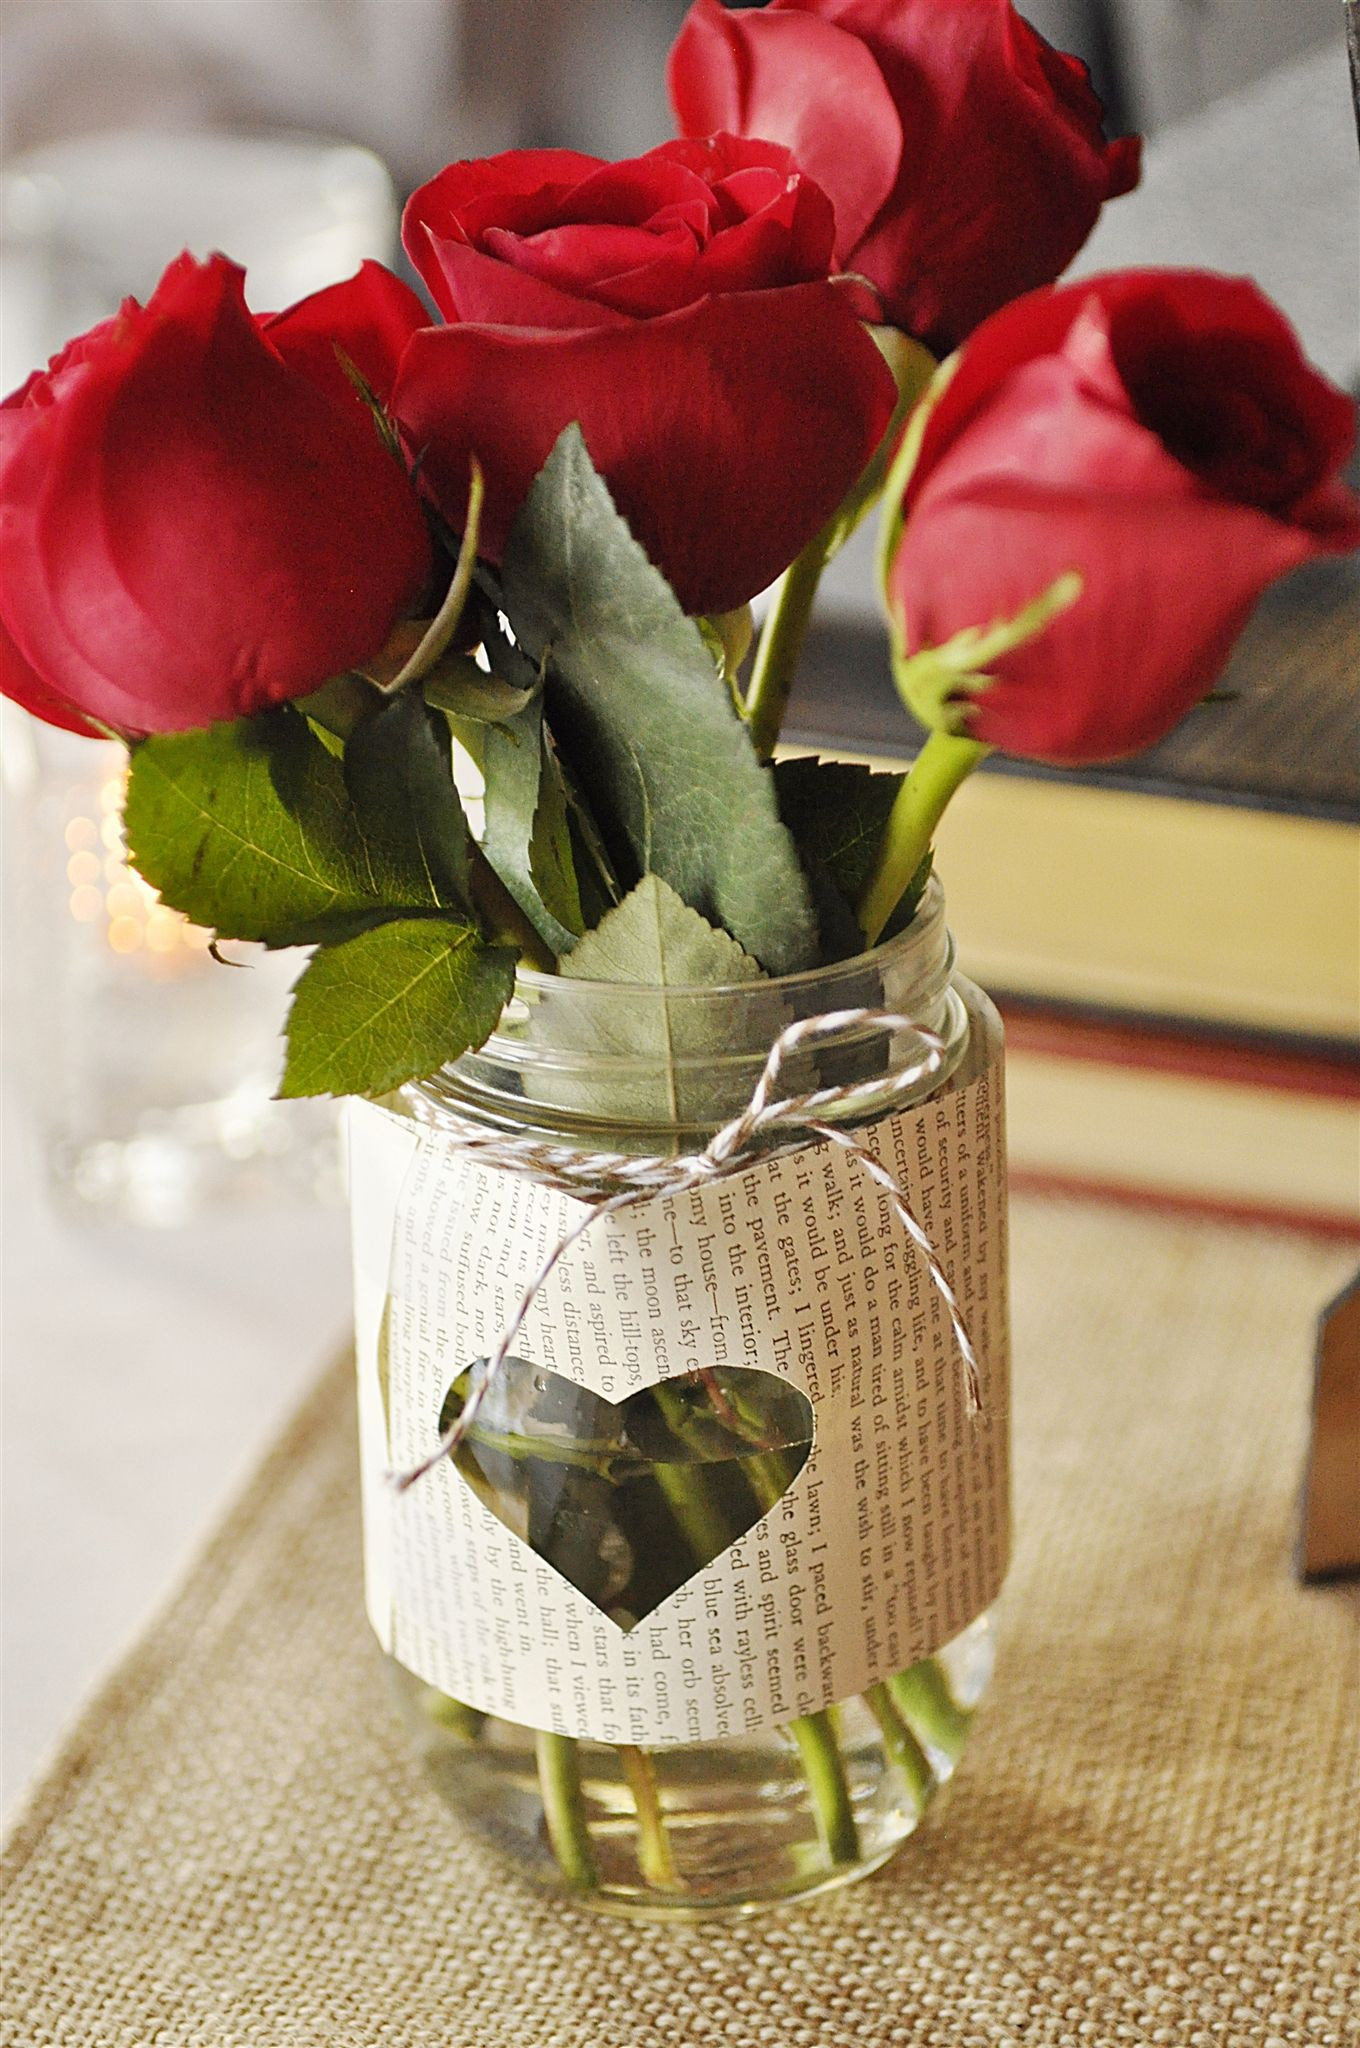 14 Perfect Vase Centerpiece Ideas for Weddings 2024 free download vase centerpiece ideas for weddings of wedding rehearsal dinnerliterary love theme vintage books books intended for vase pages from jayne eyre book used to wrap pint jar rosettes on skewer